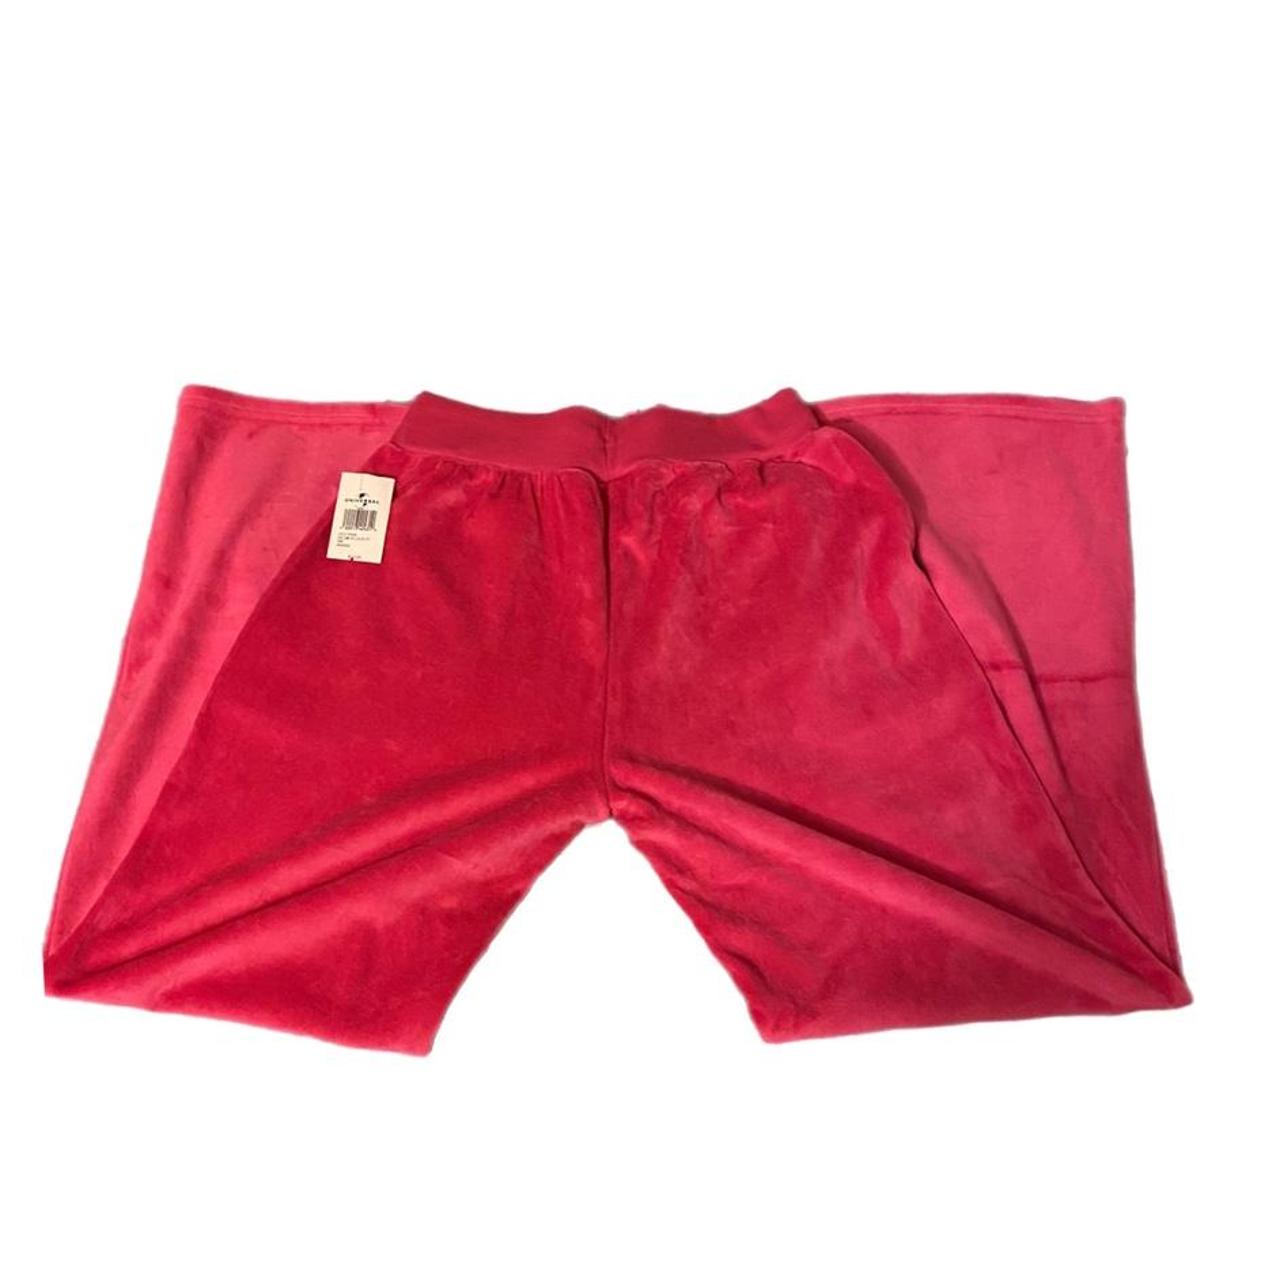 Hello Kitty Hot Pink Rhinestone Pants -Exclusively... - Depop